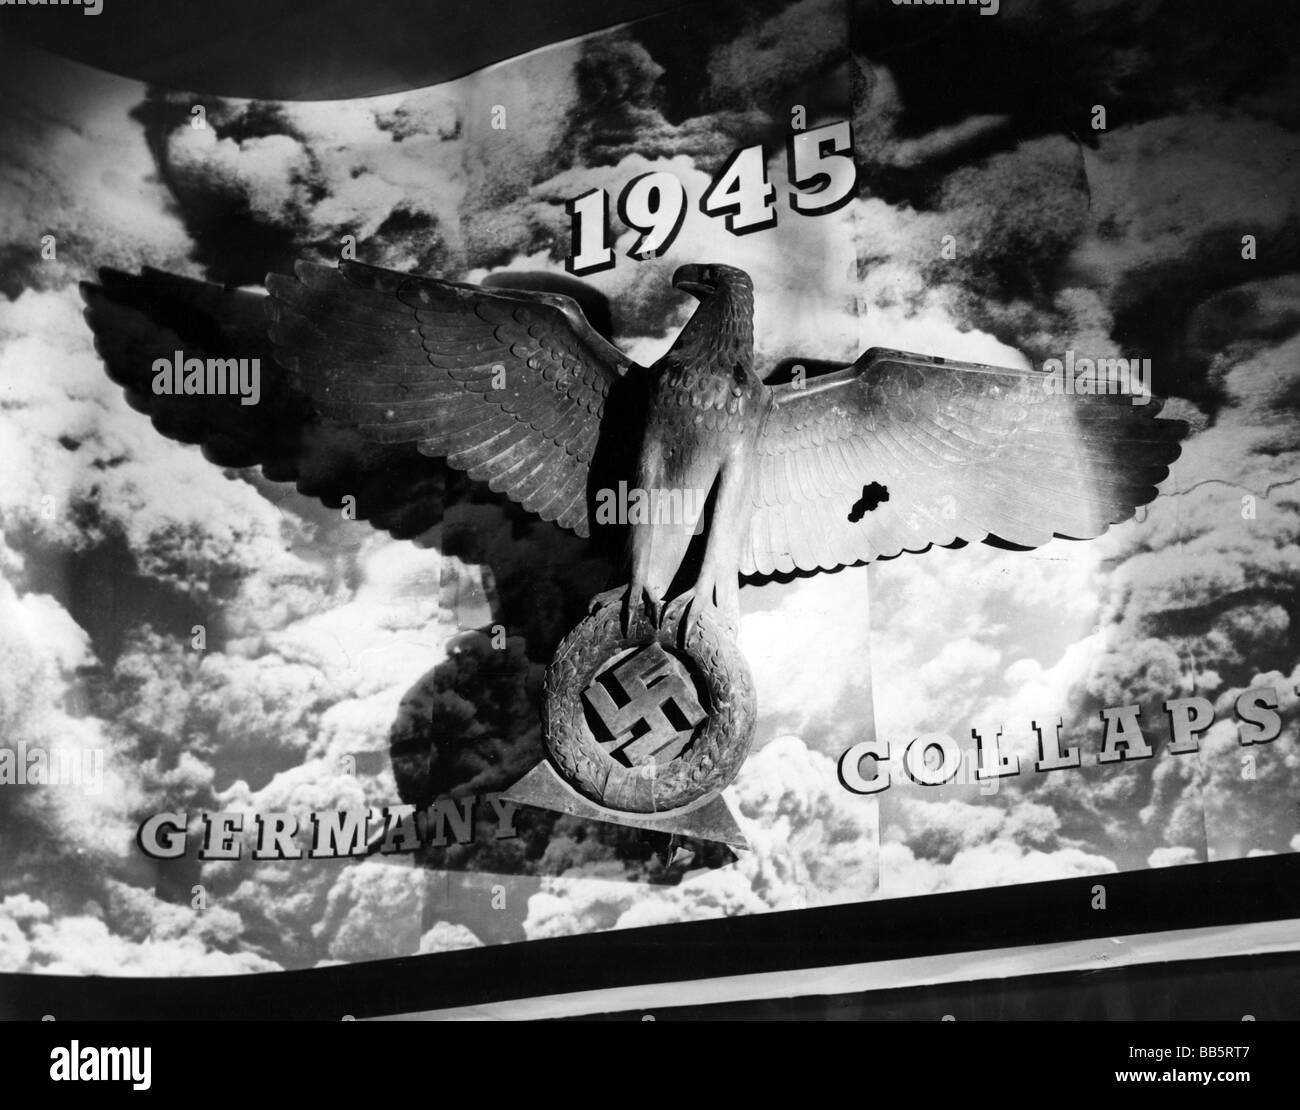 Nazism / National Socialism, emblems, imperial eagle, bronze, formerly Neue Reichskanzlei (New Reich Chancellery), Berlin, today Imperial War Museum, London, symbol, symbols, emblem, 20th century, historic, historical, swastika, Germany, Reichsadler, 1940s, Stock Photo